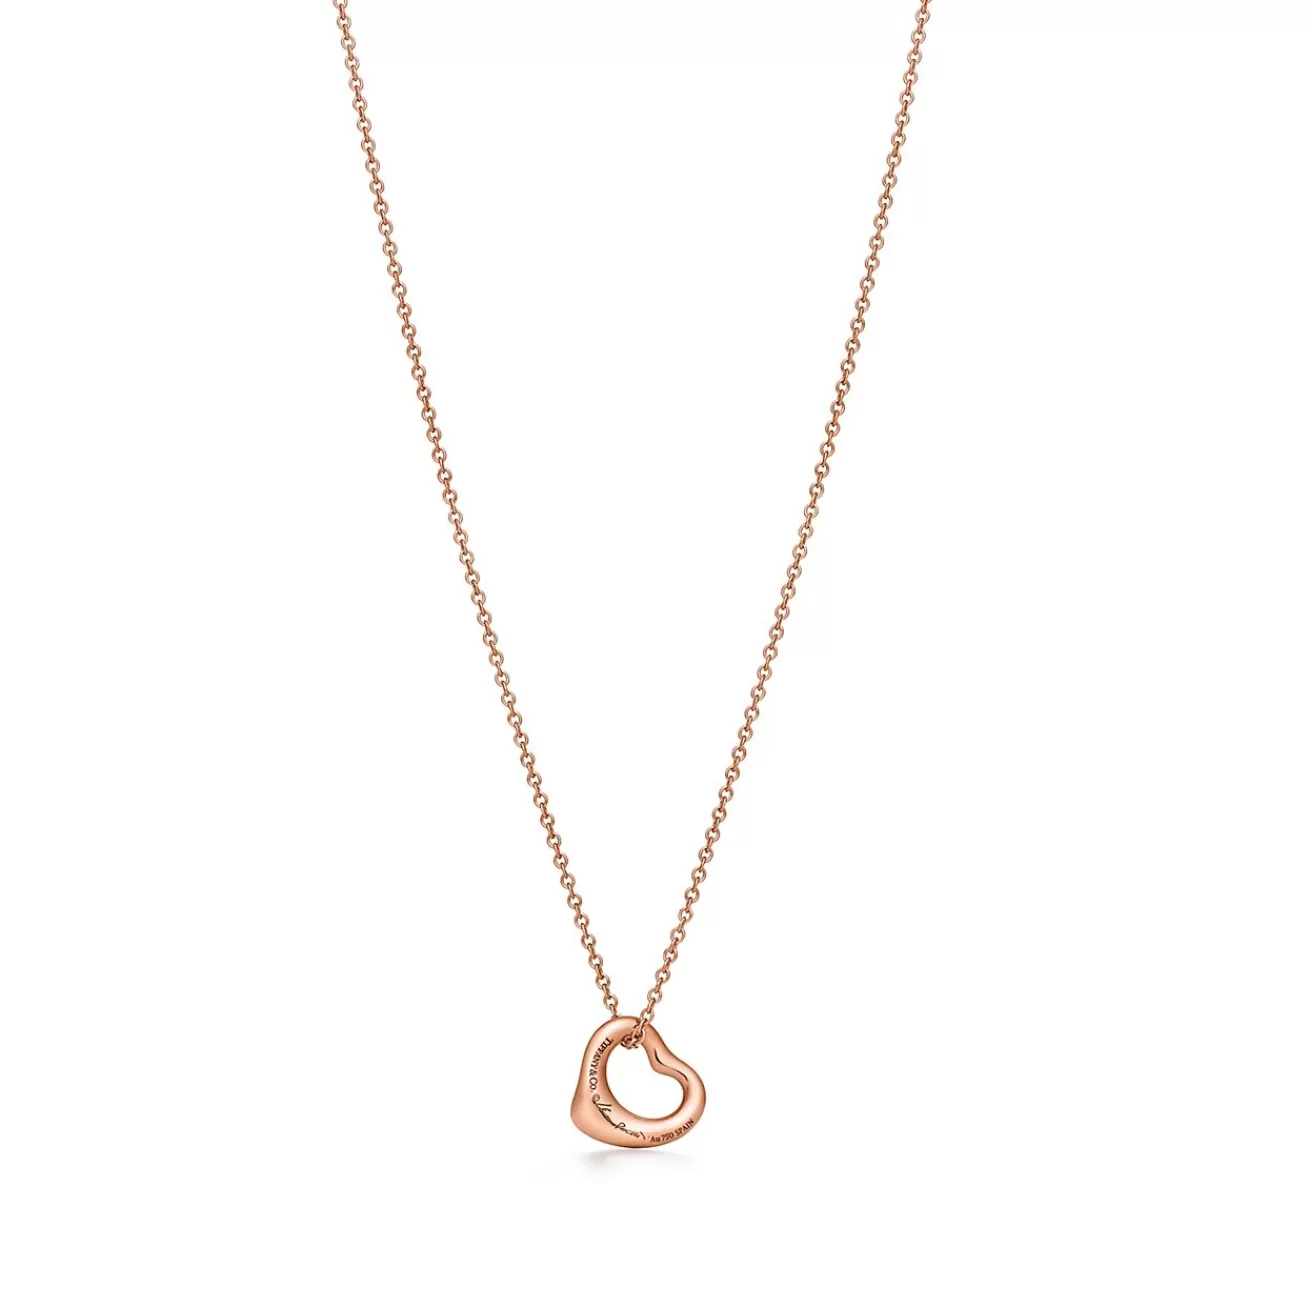 Tiffany & Co. Elsa Peretti® Open Heart pendant in 18k rose gold with diamonds, 11 mm wide. | ^ Necklaces & Pendants | Rose Gold Jewelry